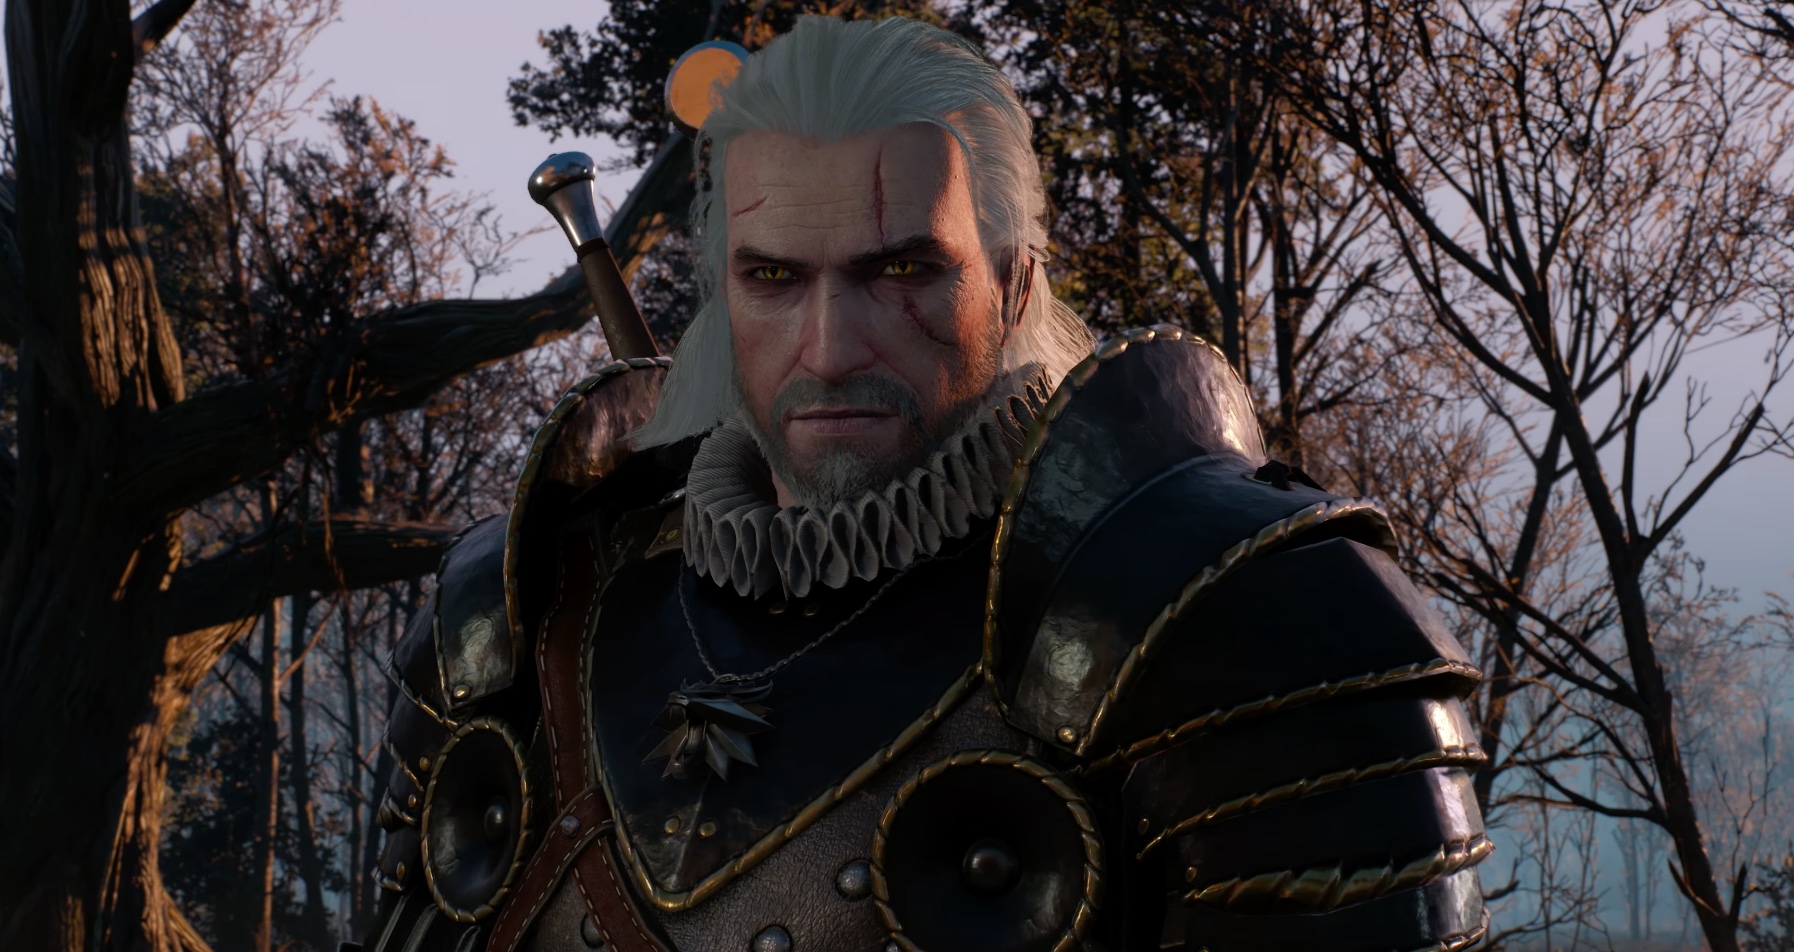 CD Projekt Red Has Announced That The Witcher 3 Wild Hunt Will Receive A  New Next-Gen Edition For PS5 And Xbox